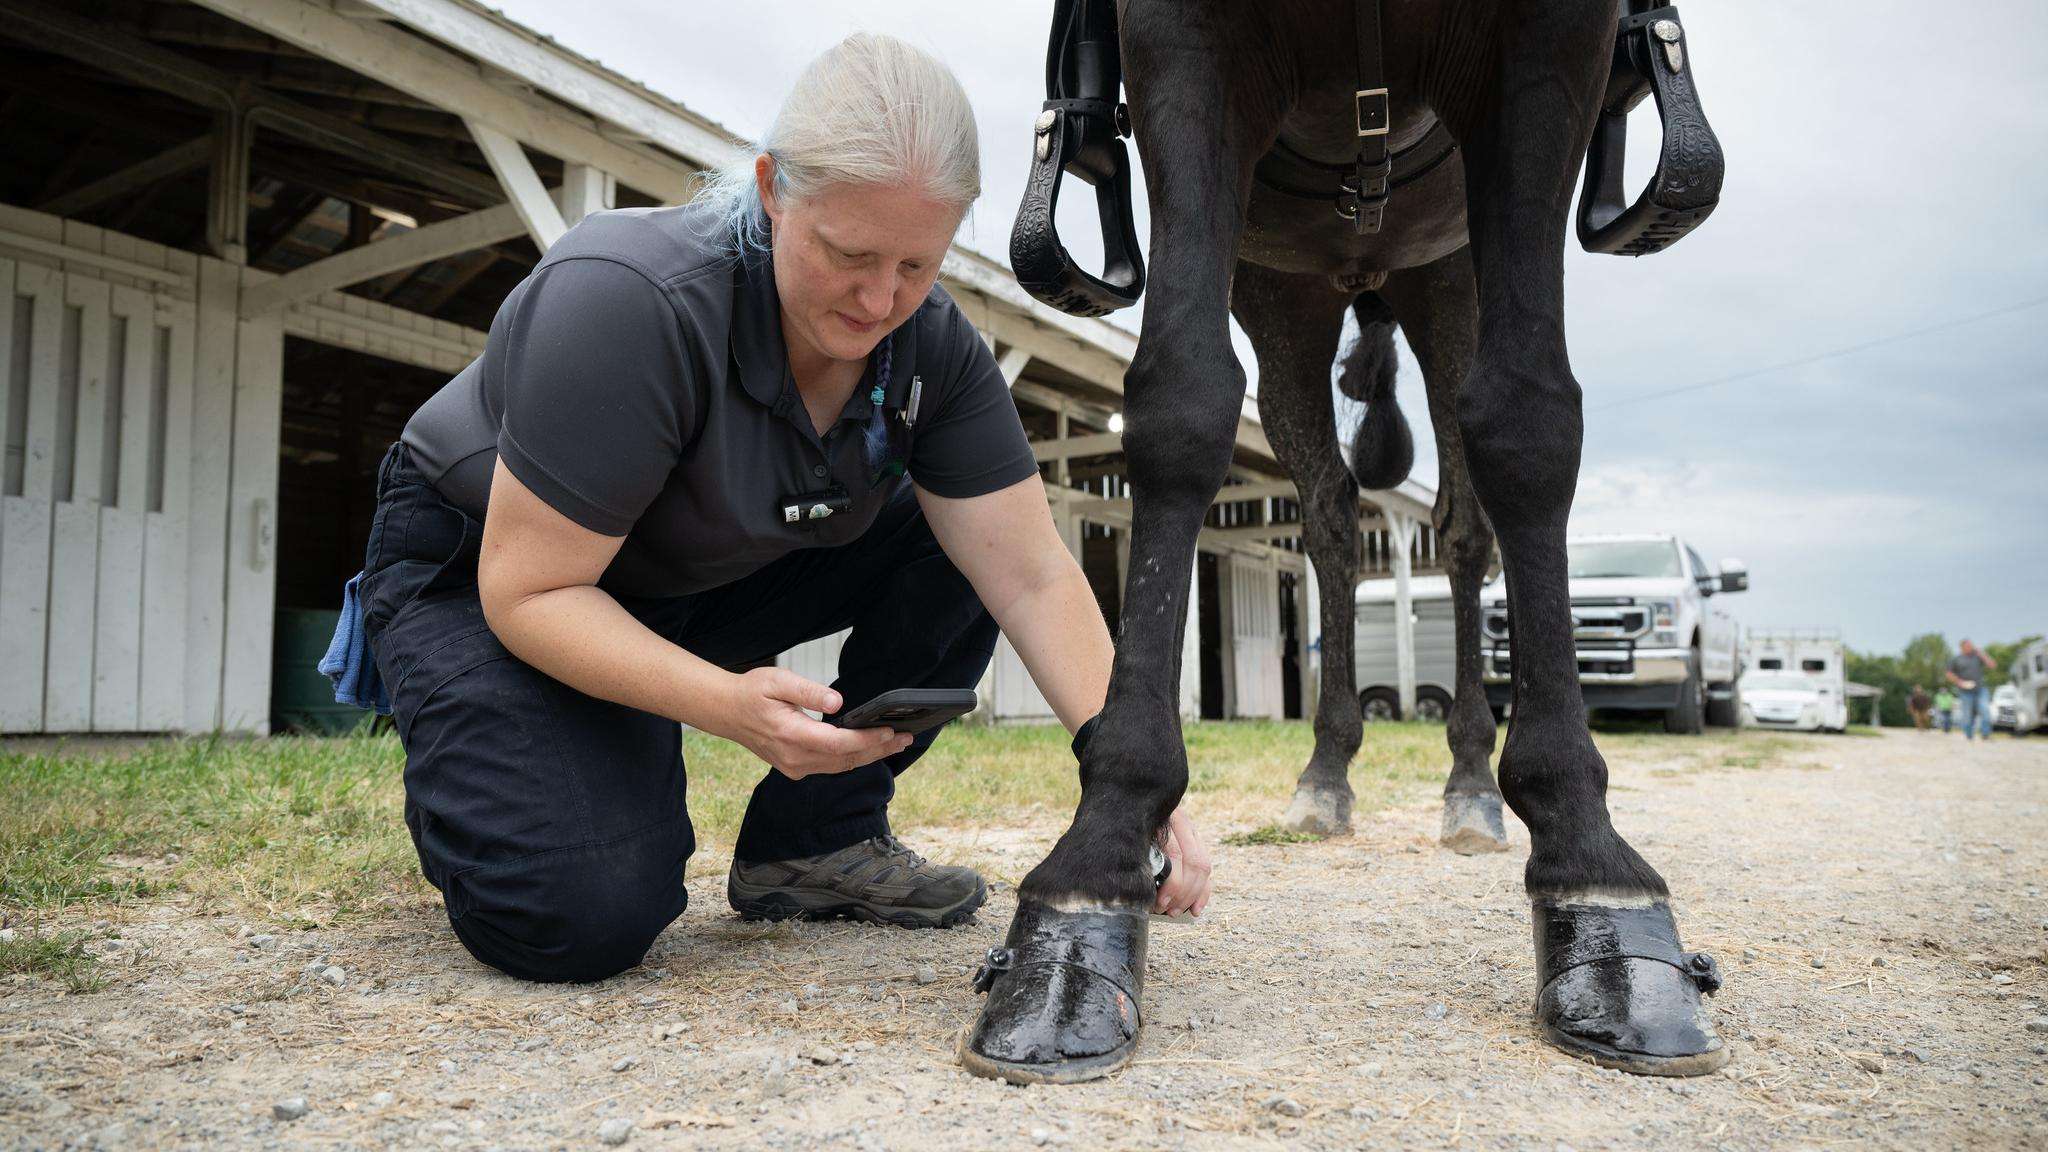 Animal Care inspector uses a portable ultrasound instrument that connects via Bluetooth to a cell phone to help identify sored horses, 